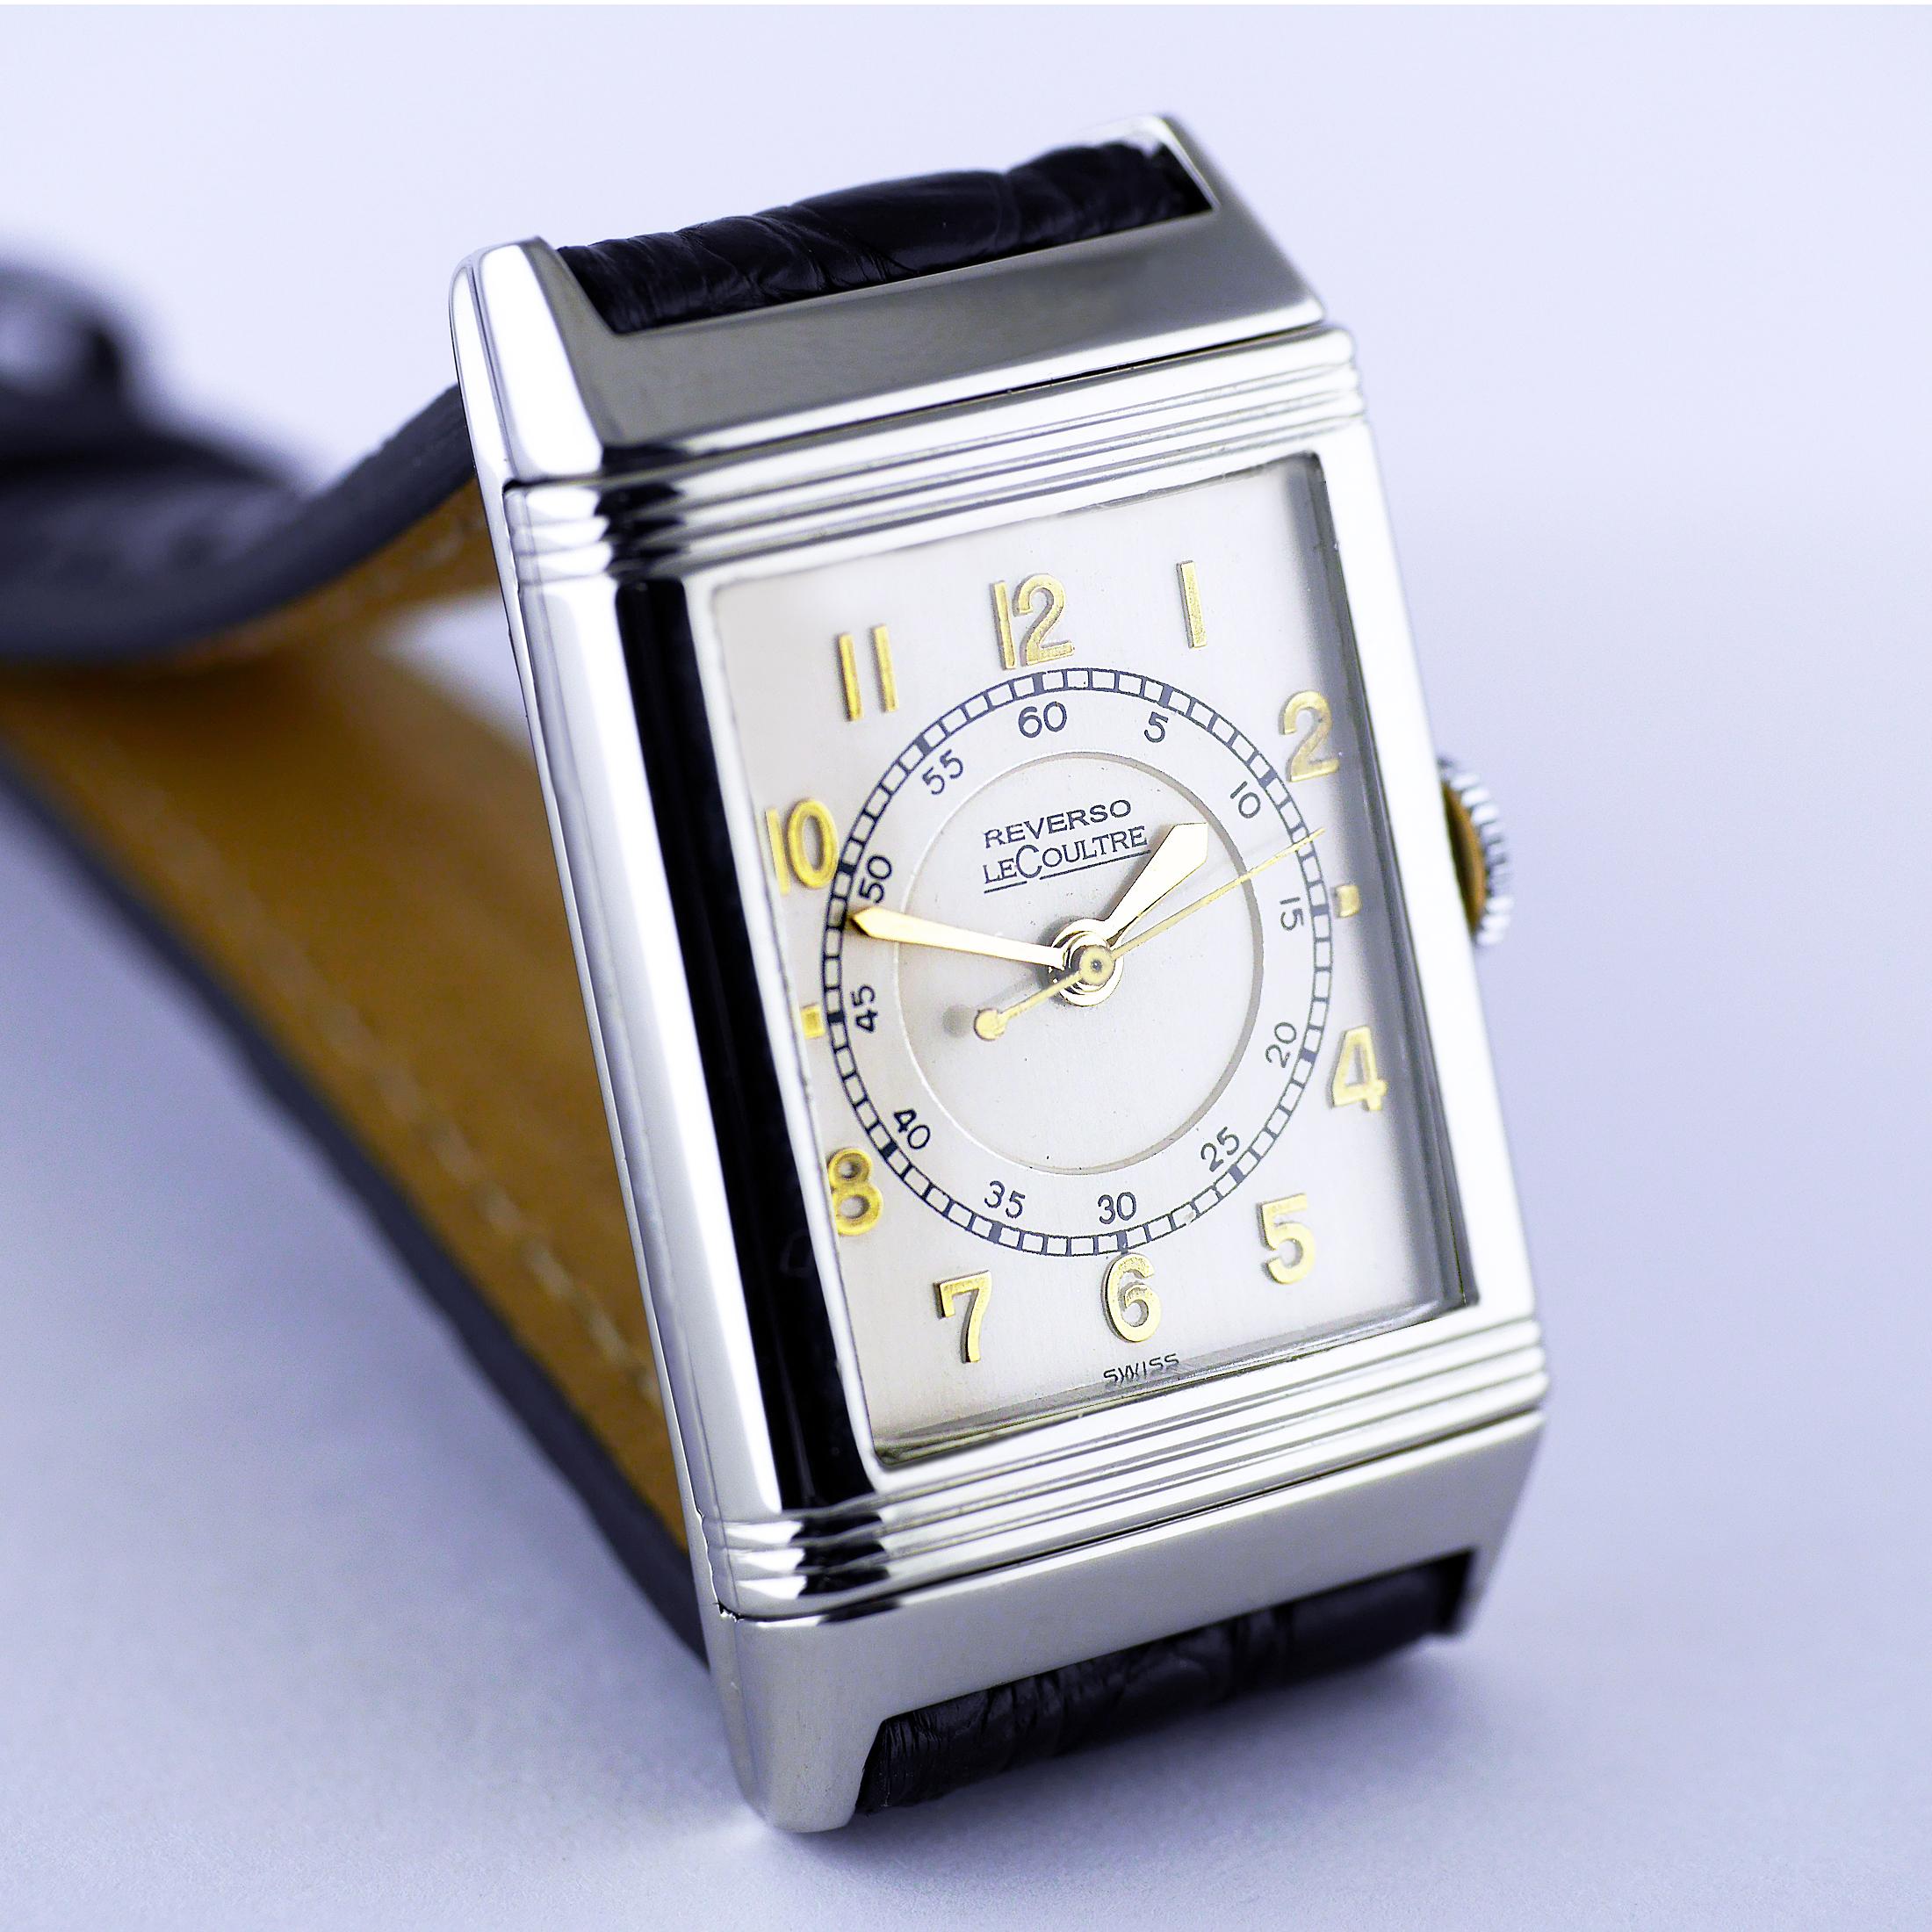 Le Coultre Reverso, Art Deco, Stainless Steel Wristwatch, circa 1934 For Sale 2